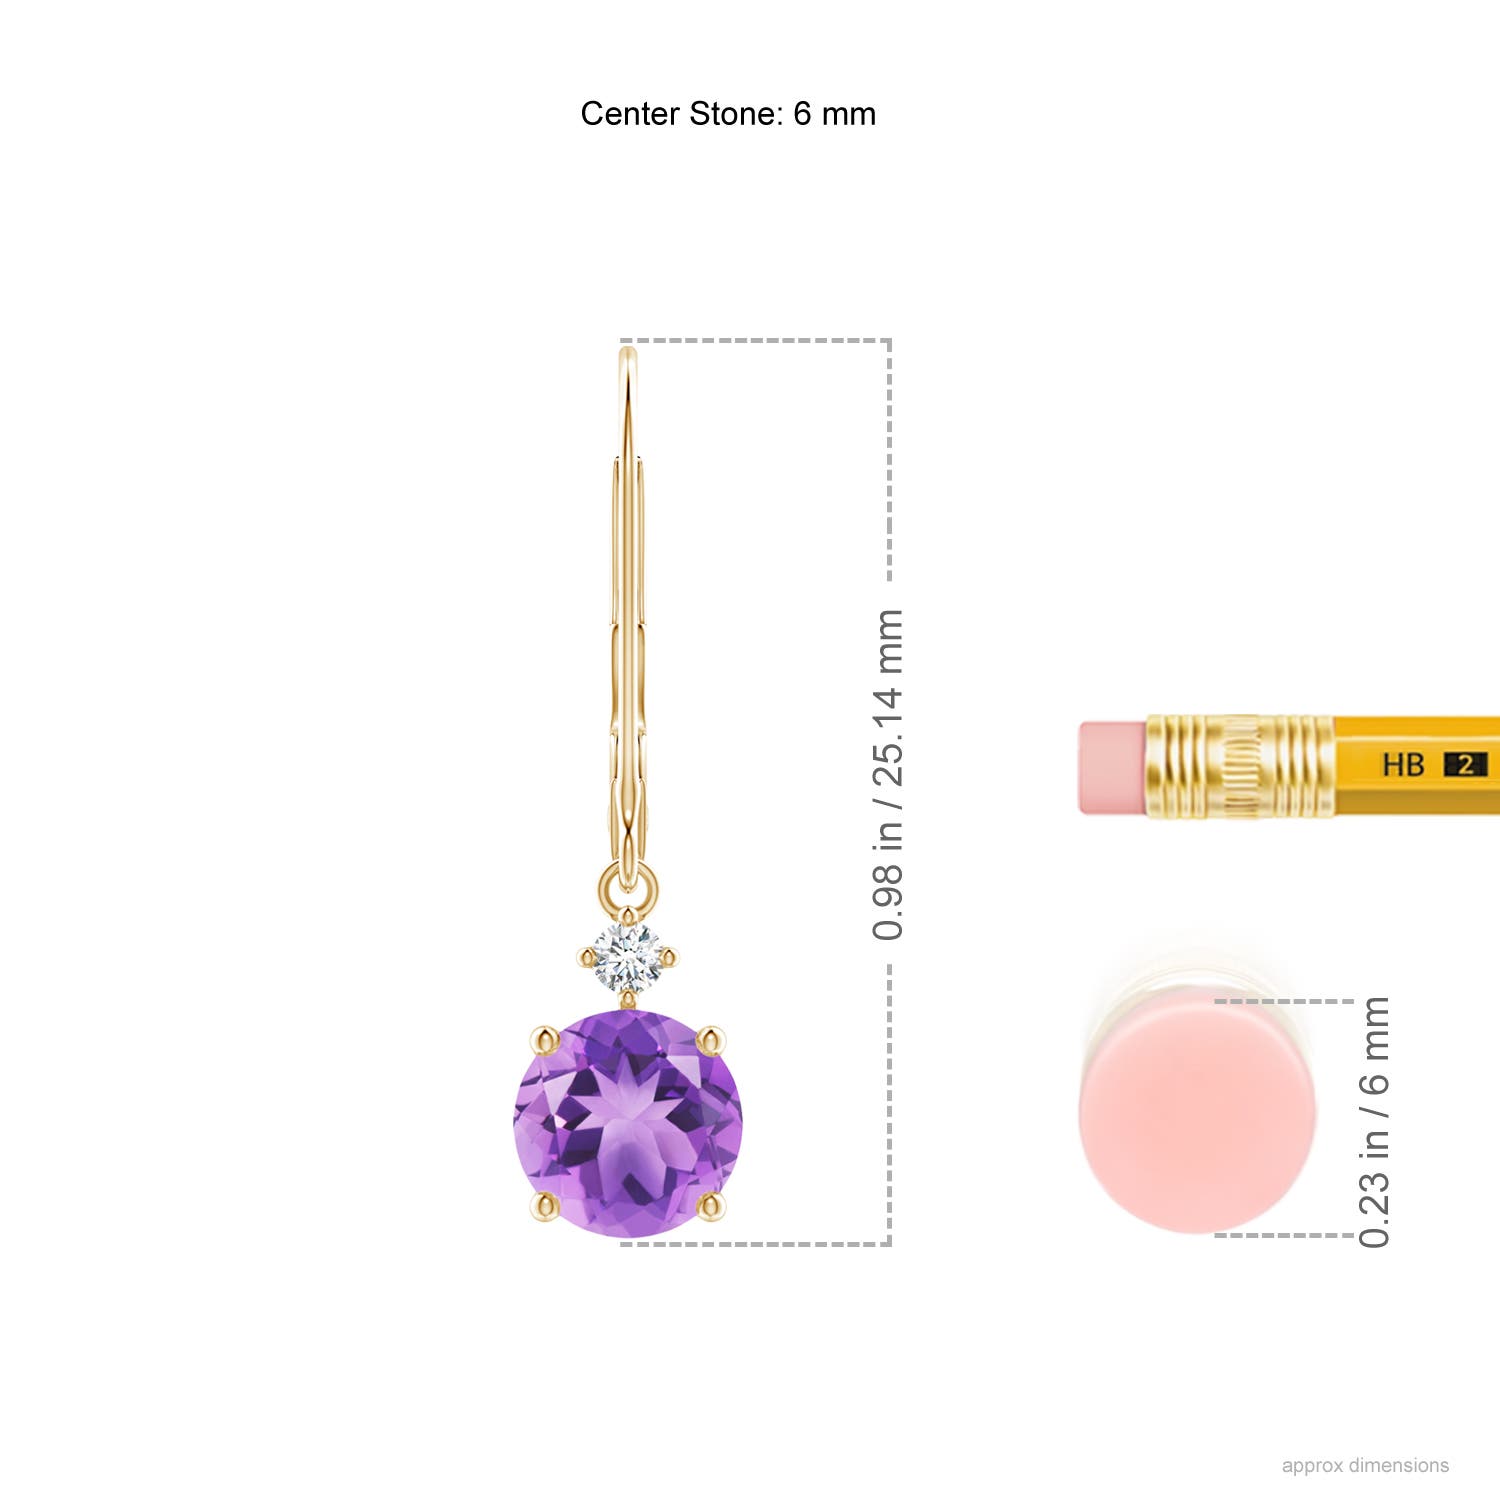 A - Amethyst / 1.65 CT / 14 KT Yellow Gold